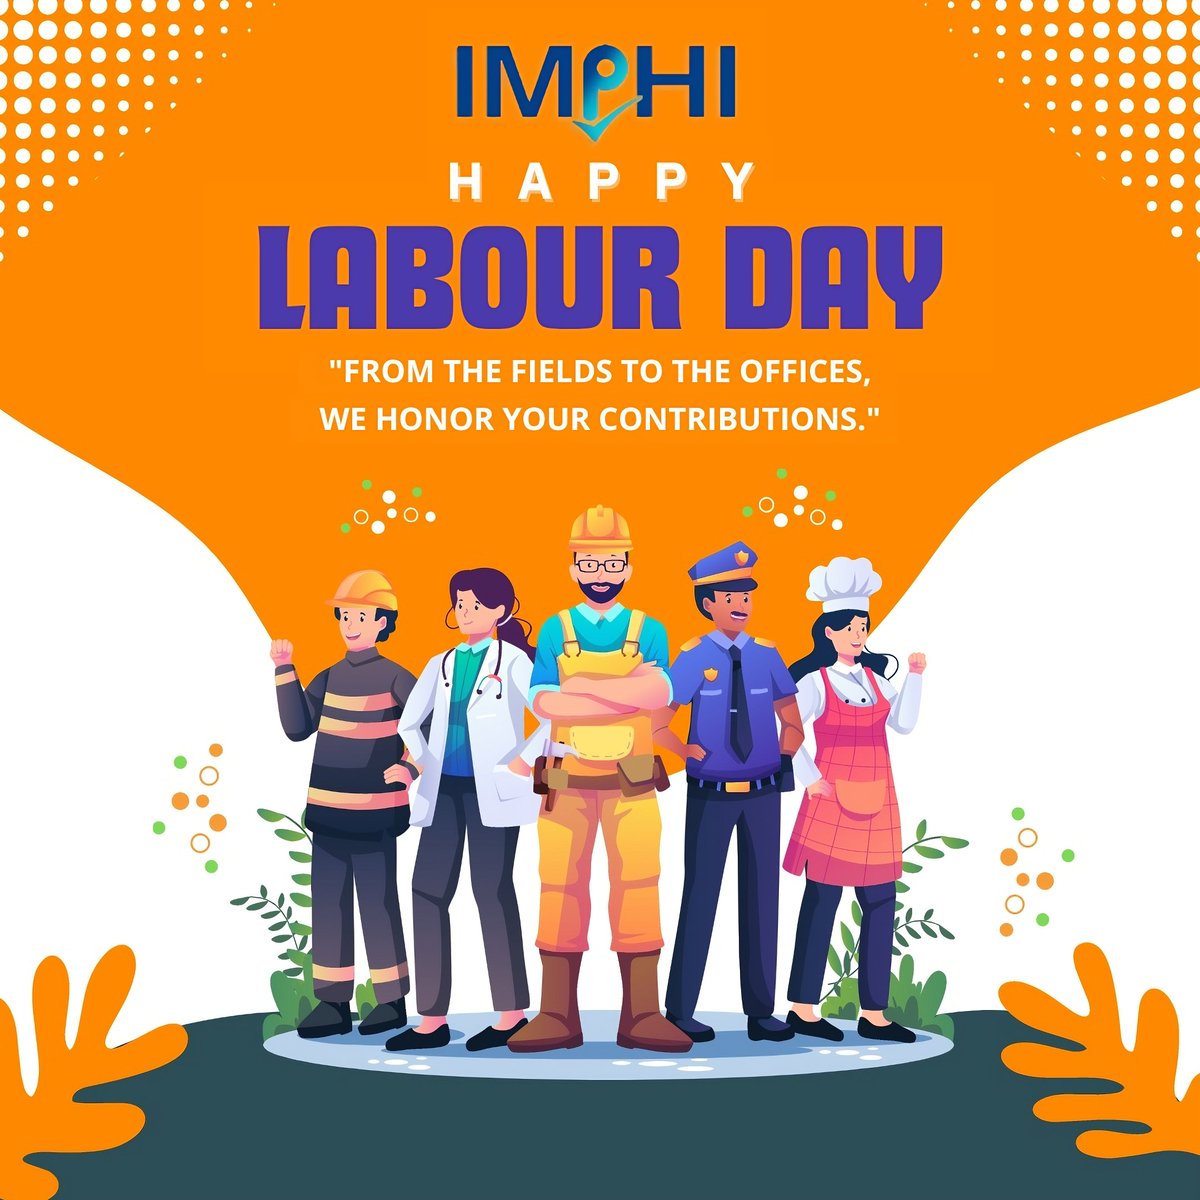 Happy Labour Day! May your hard work always be recognized and rewarded, and may you find joy and fullfillment in everything you do. Wishing you a well-deserved day of relaxation and celebration.
#imphi #navata #imphiproduct #imphifranchise #franchise #FranchiseBusiness